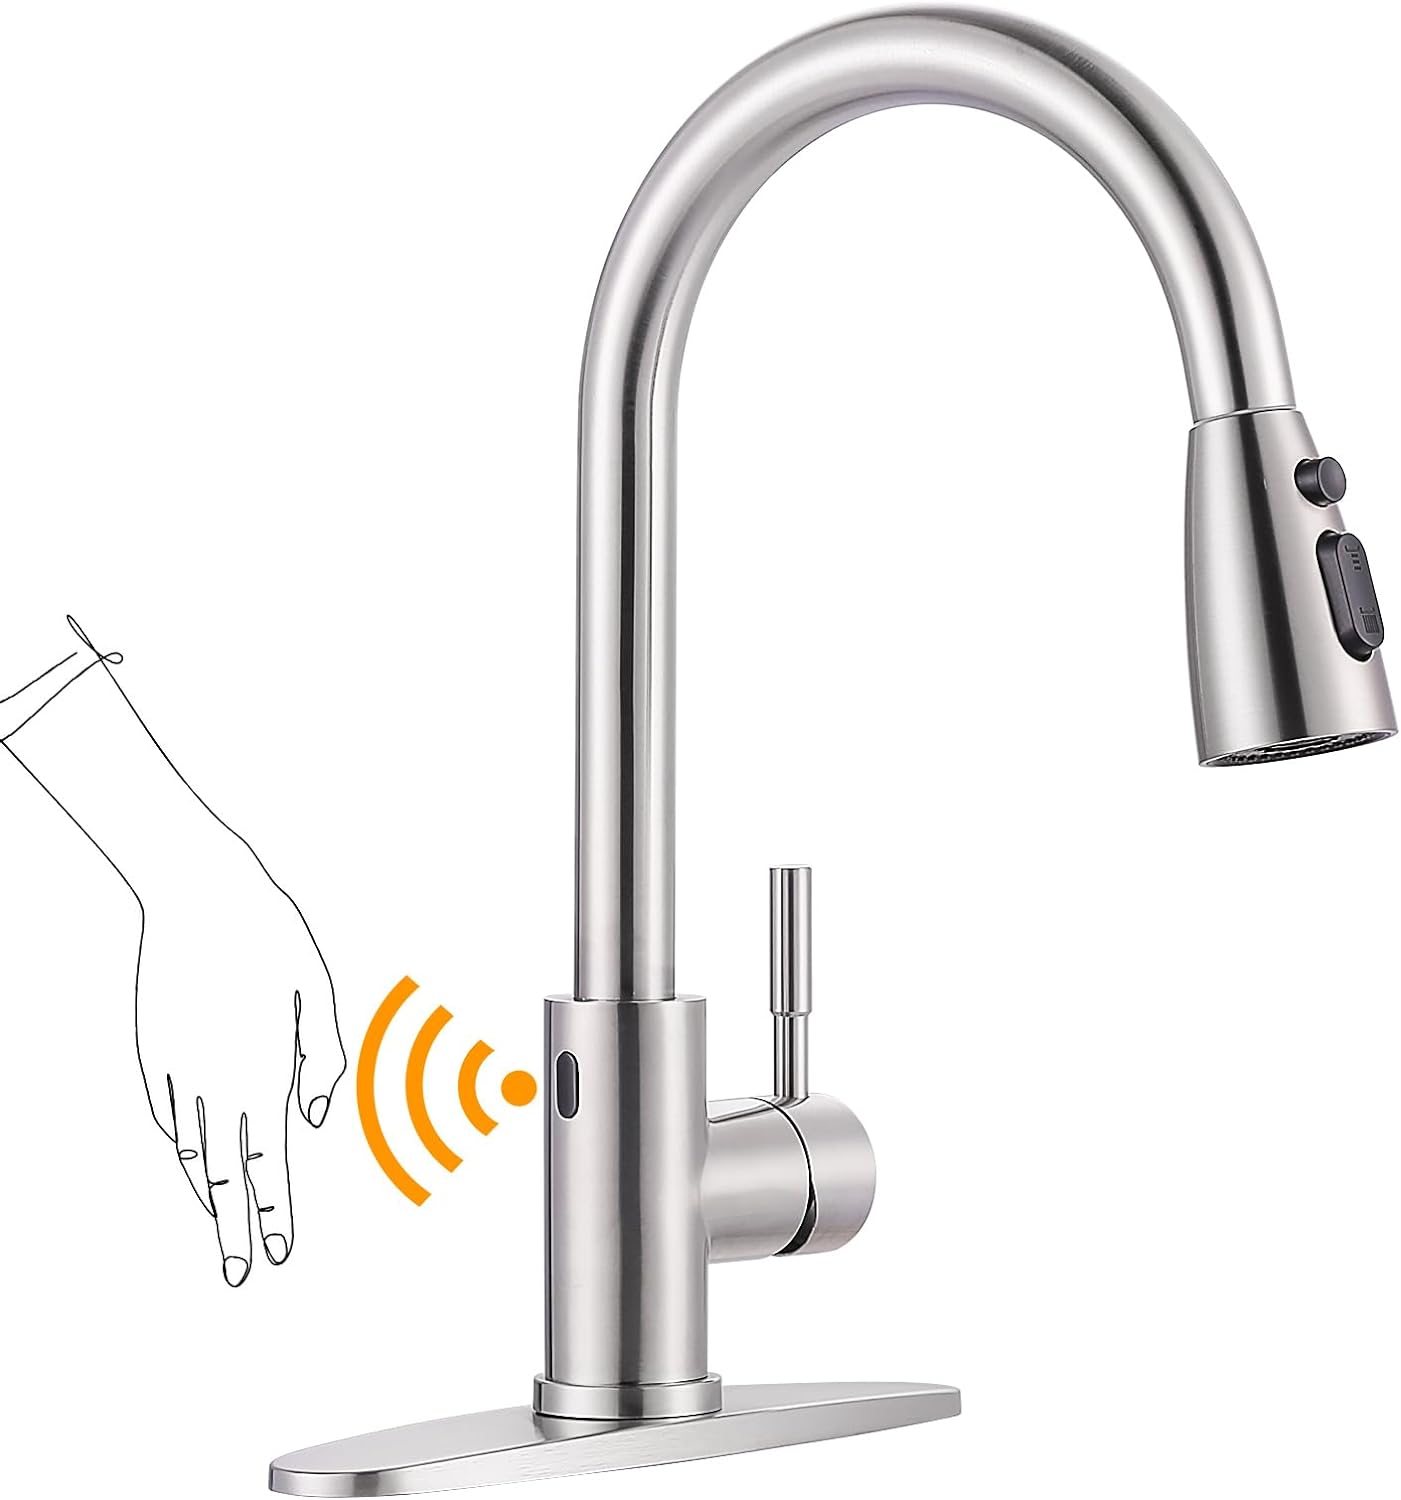 WOWOW Touchless Kitchen Faucet with Sprayer, Smart Motion Sensor Kitchen Sink Faucet, Stainless Steel Kitchen Faucet for Sink 1 or 3 Hole Brushed Nickel Single Handle Kitchen Tap